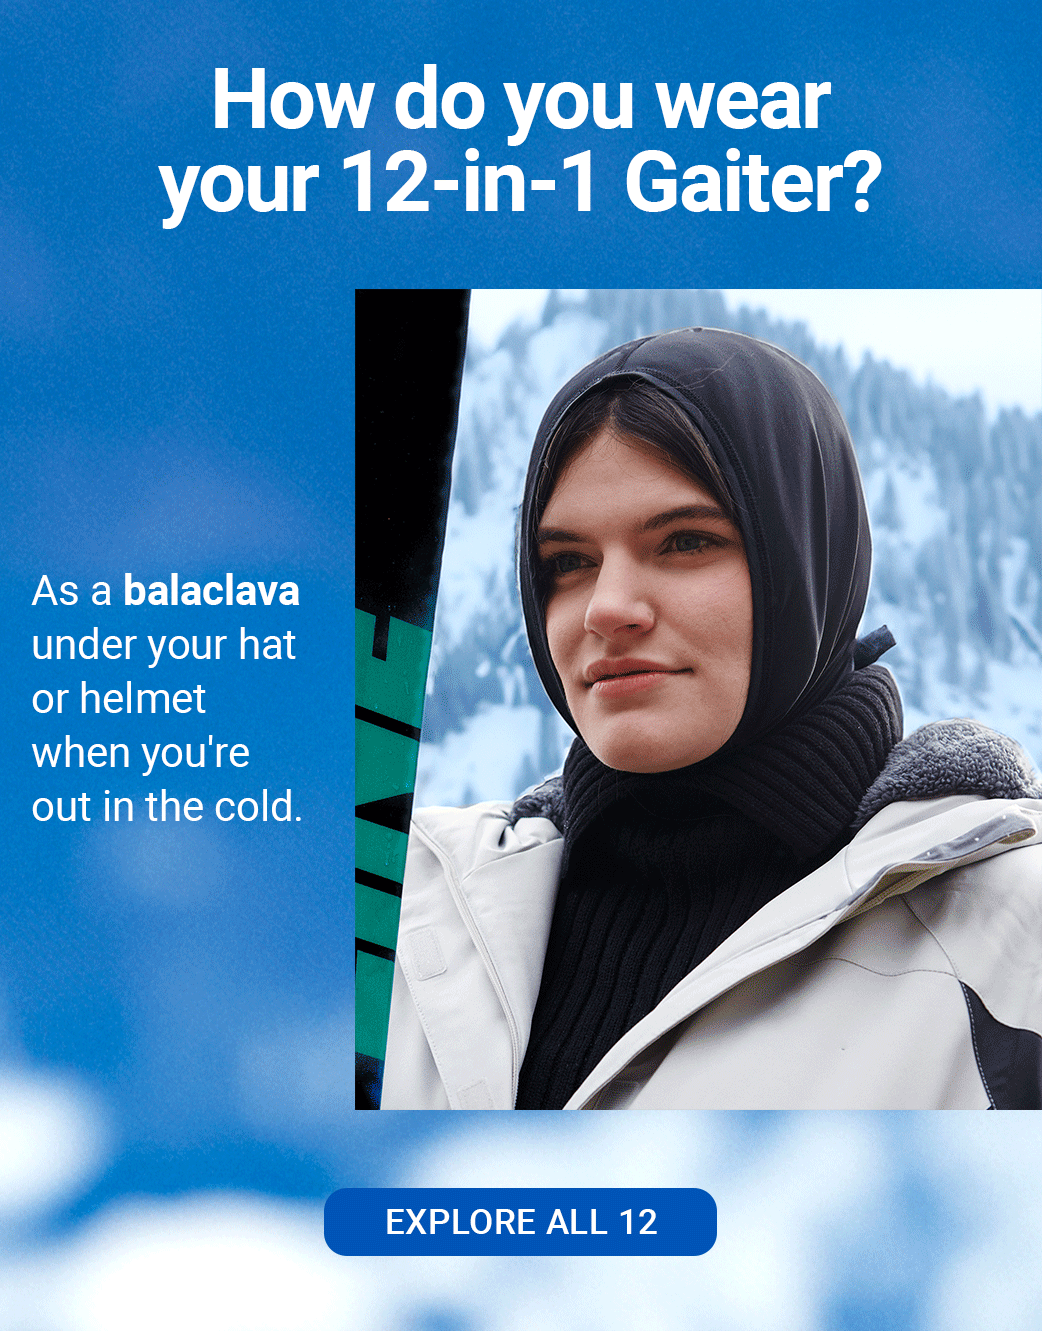 HOW DO YOU WEAR YOUR 12-IN-1 GAITER? As a headband to keep your hair and sweat out of your face. As a balaclava under your hat or helmet when you're out in the cold. As a face mask for protection against the sun, cold winds and debris. [EXPLORE ALL 12]